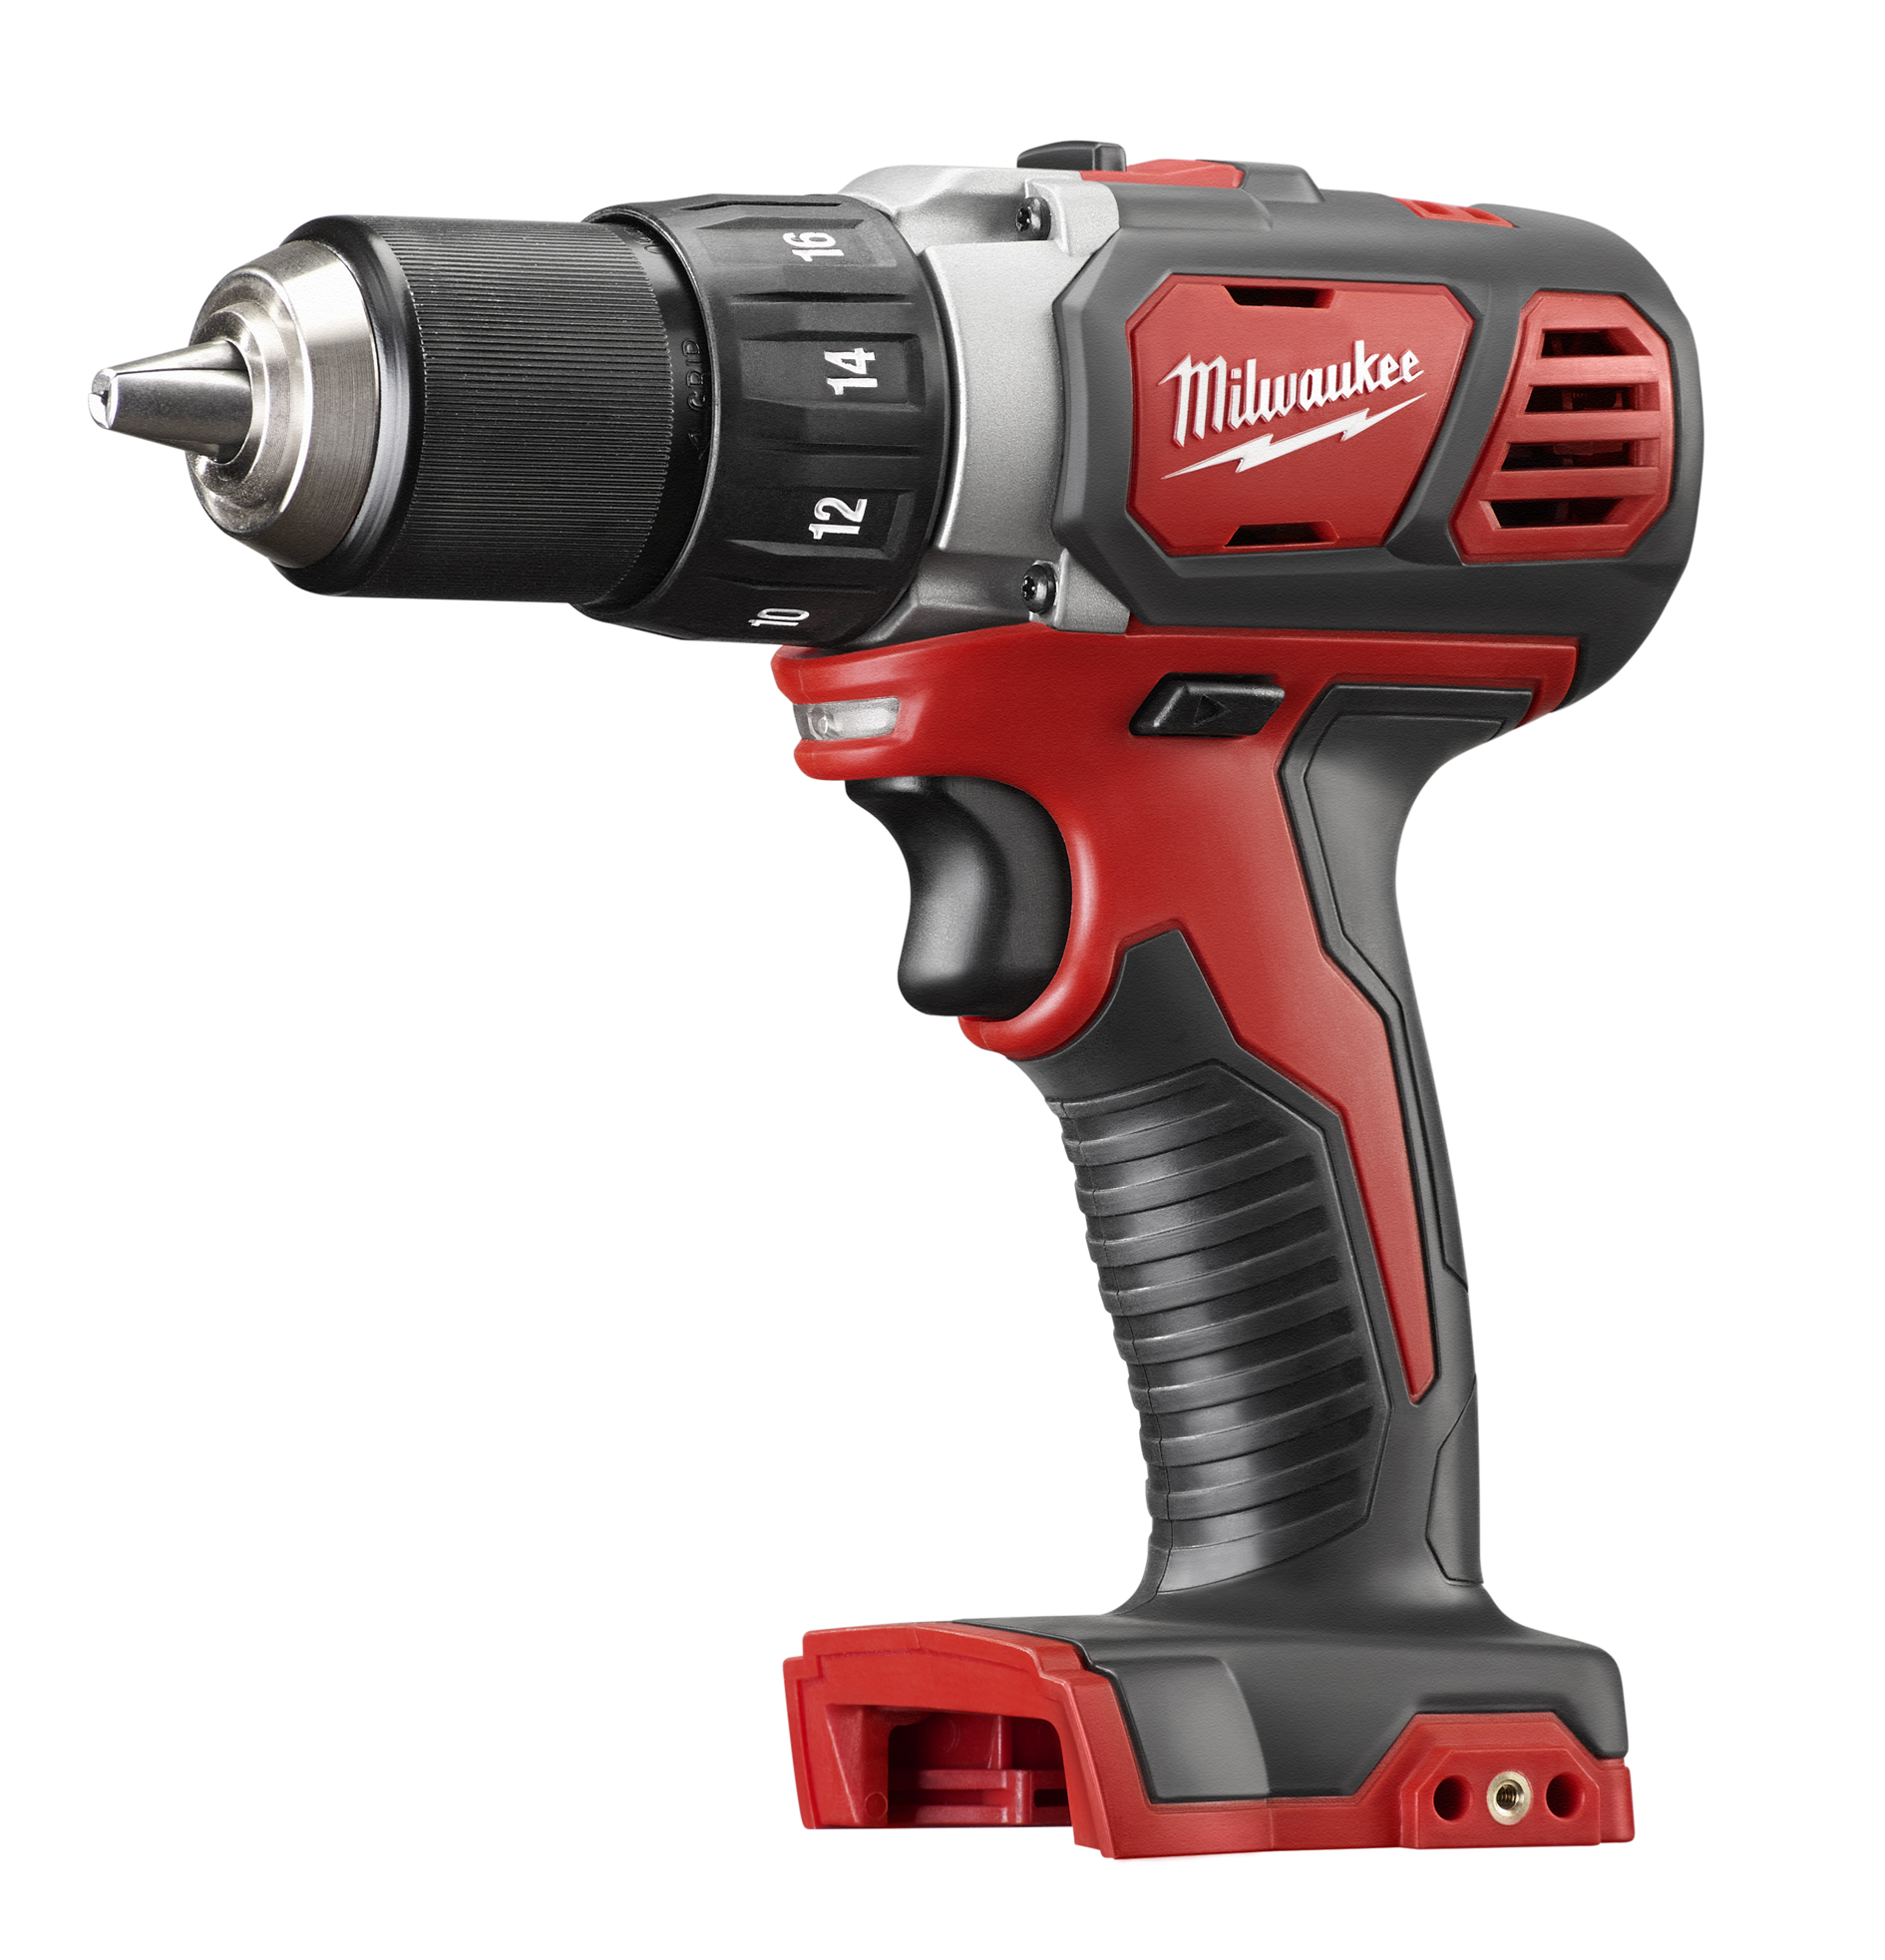 M18 18 Volt Lithium-Ion Cordless Compact 1/2 in. Drill Driver - Tool Only